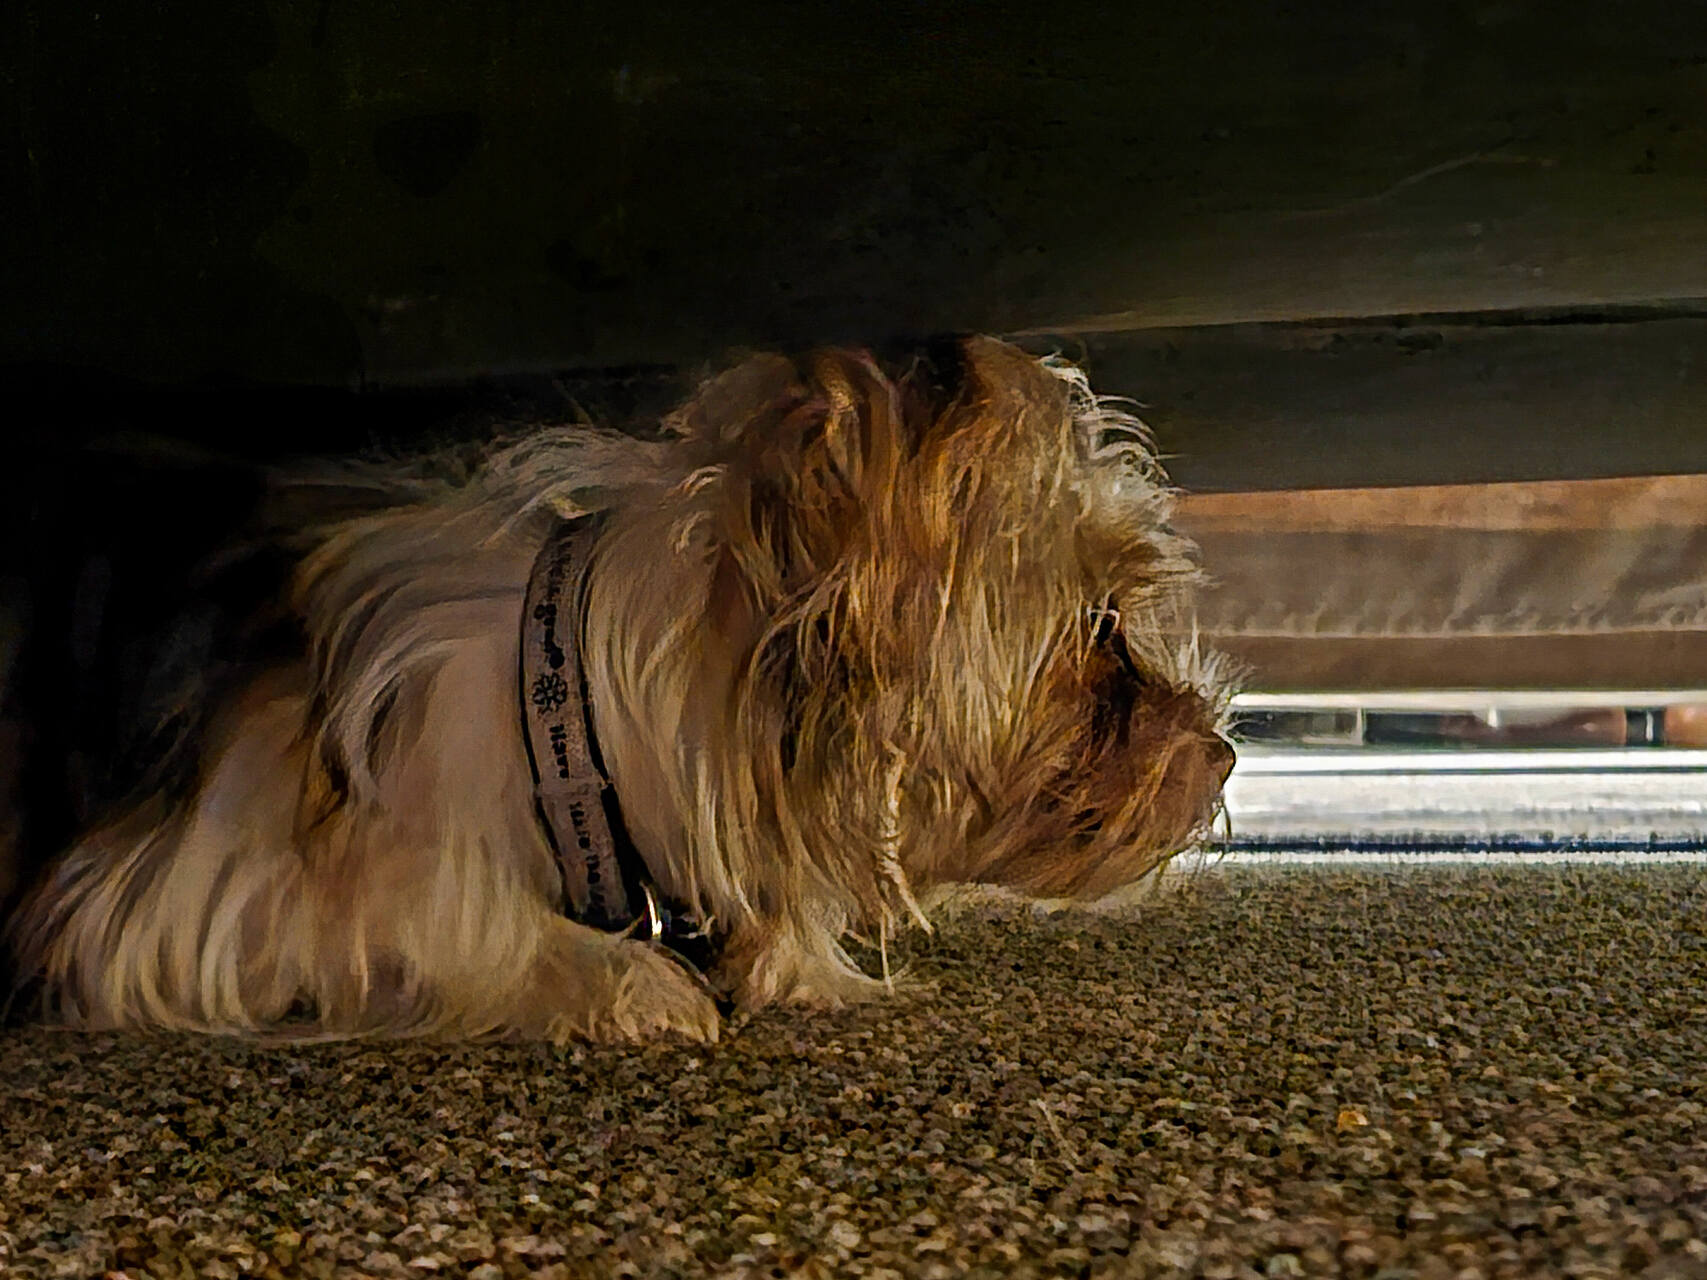 A frightened dog hiding under a bed